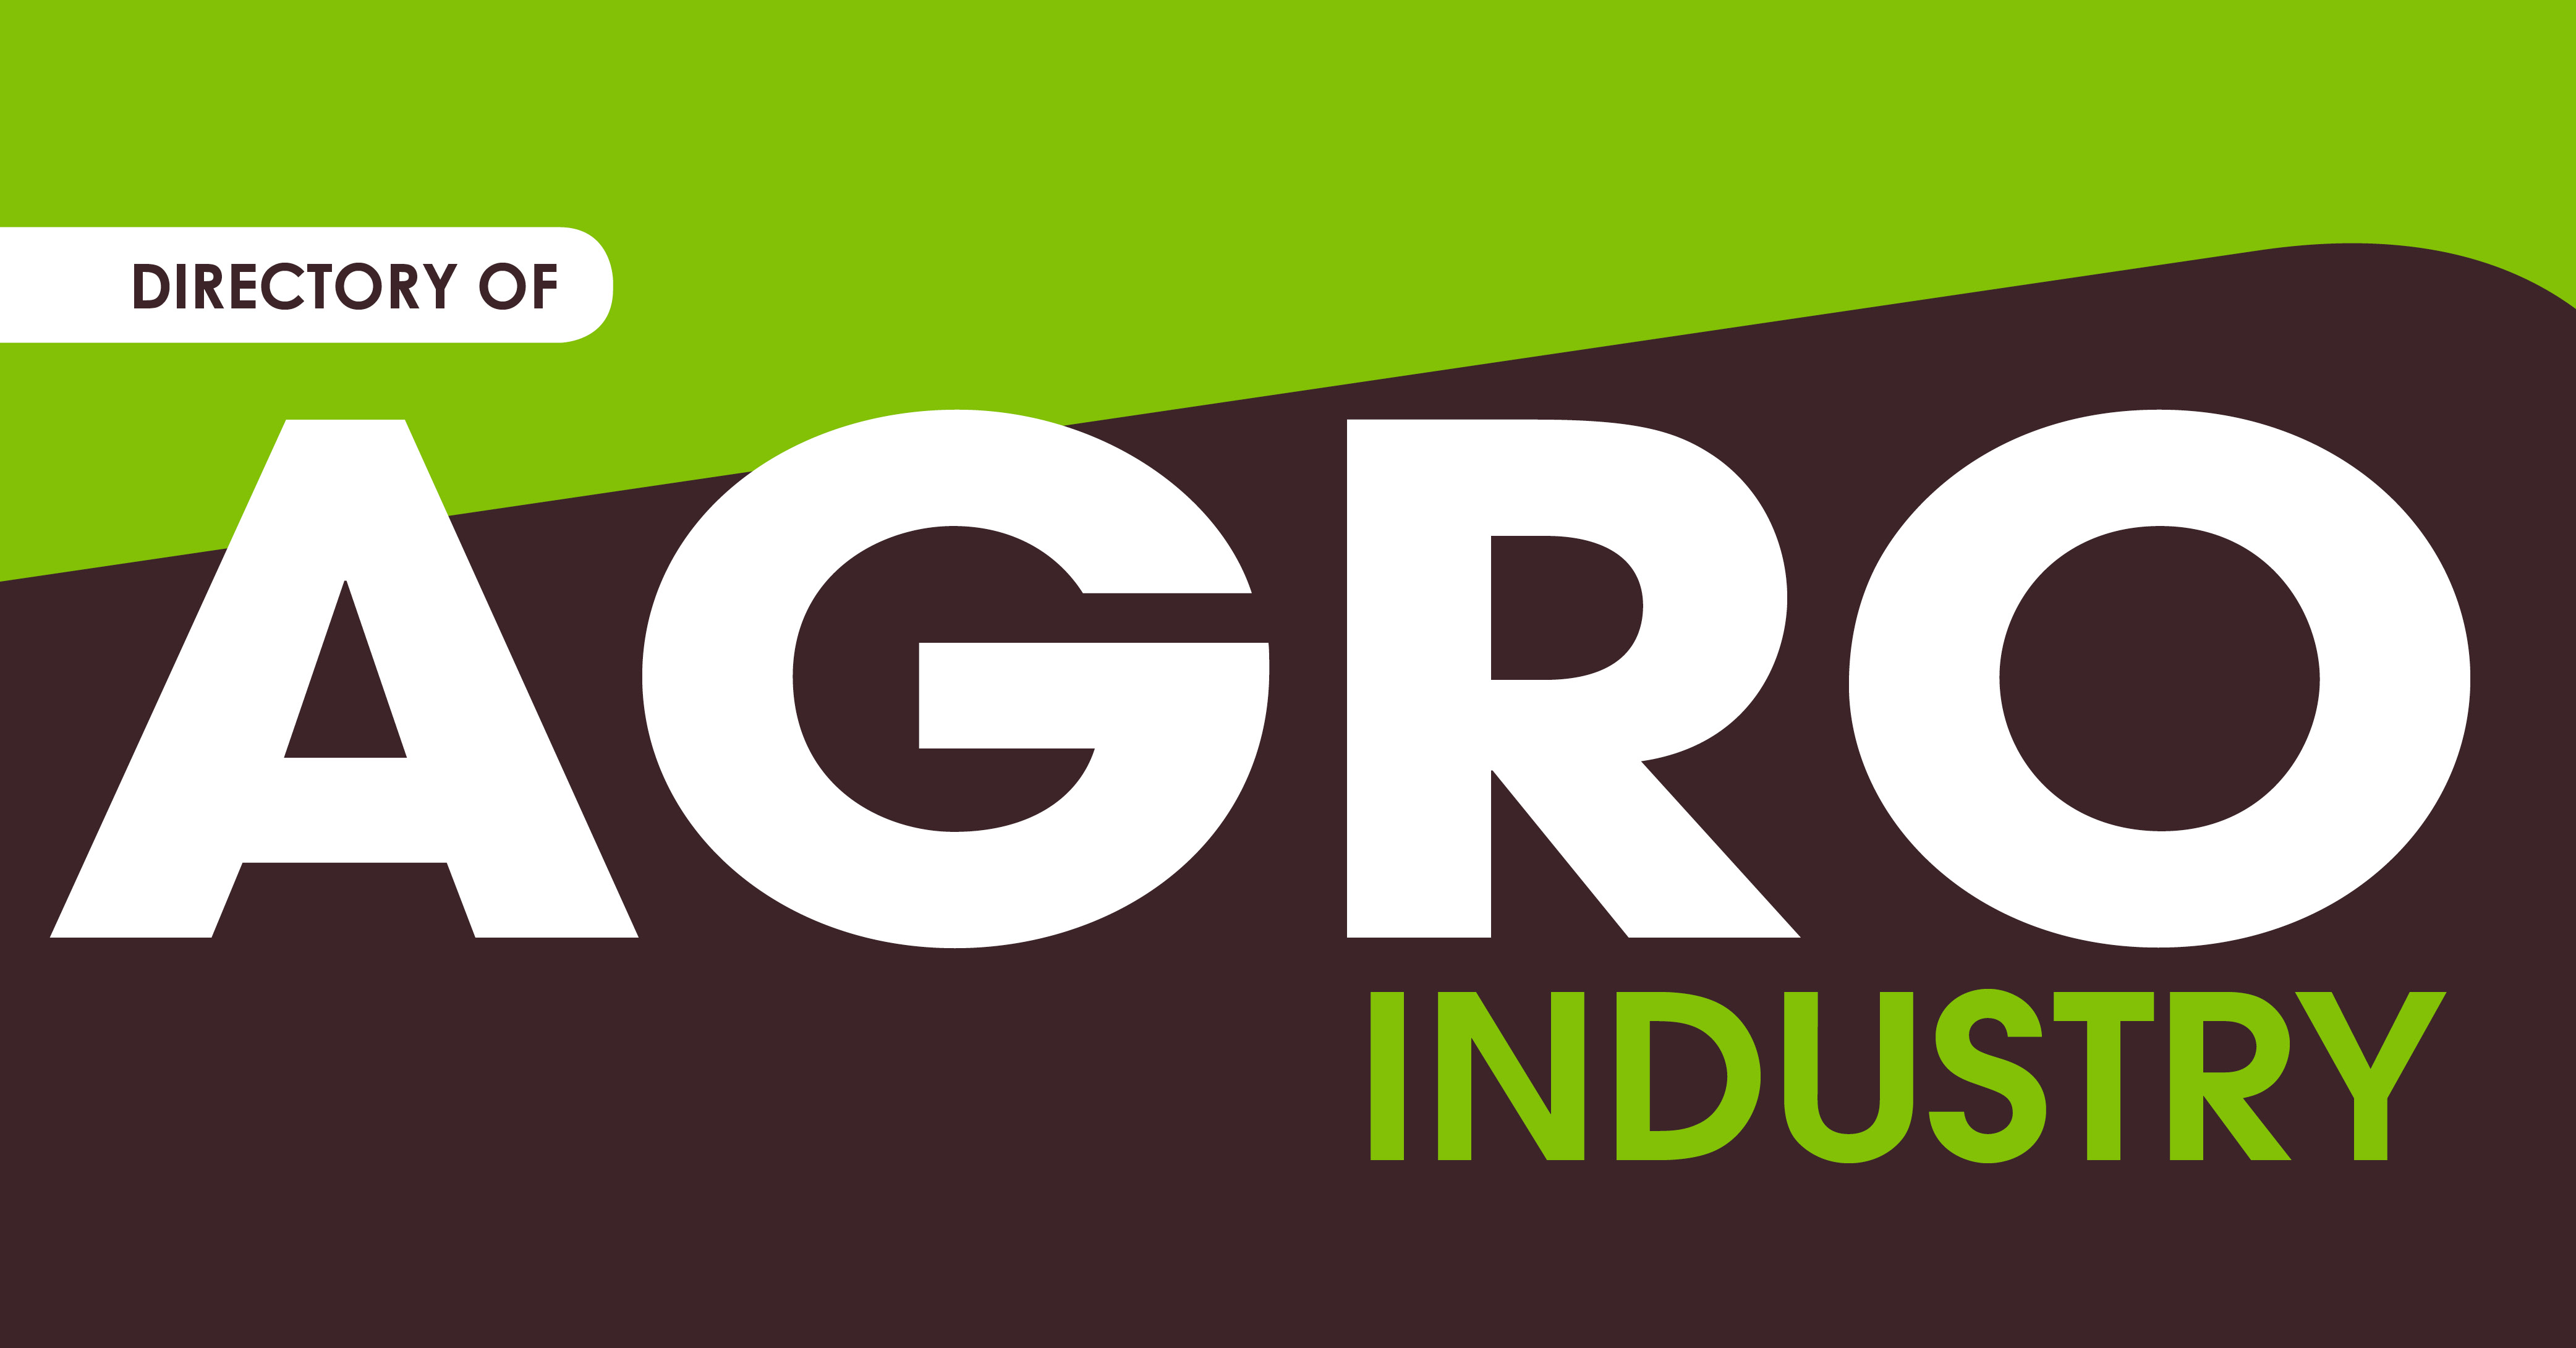 The Directory of Agro Industry